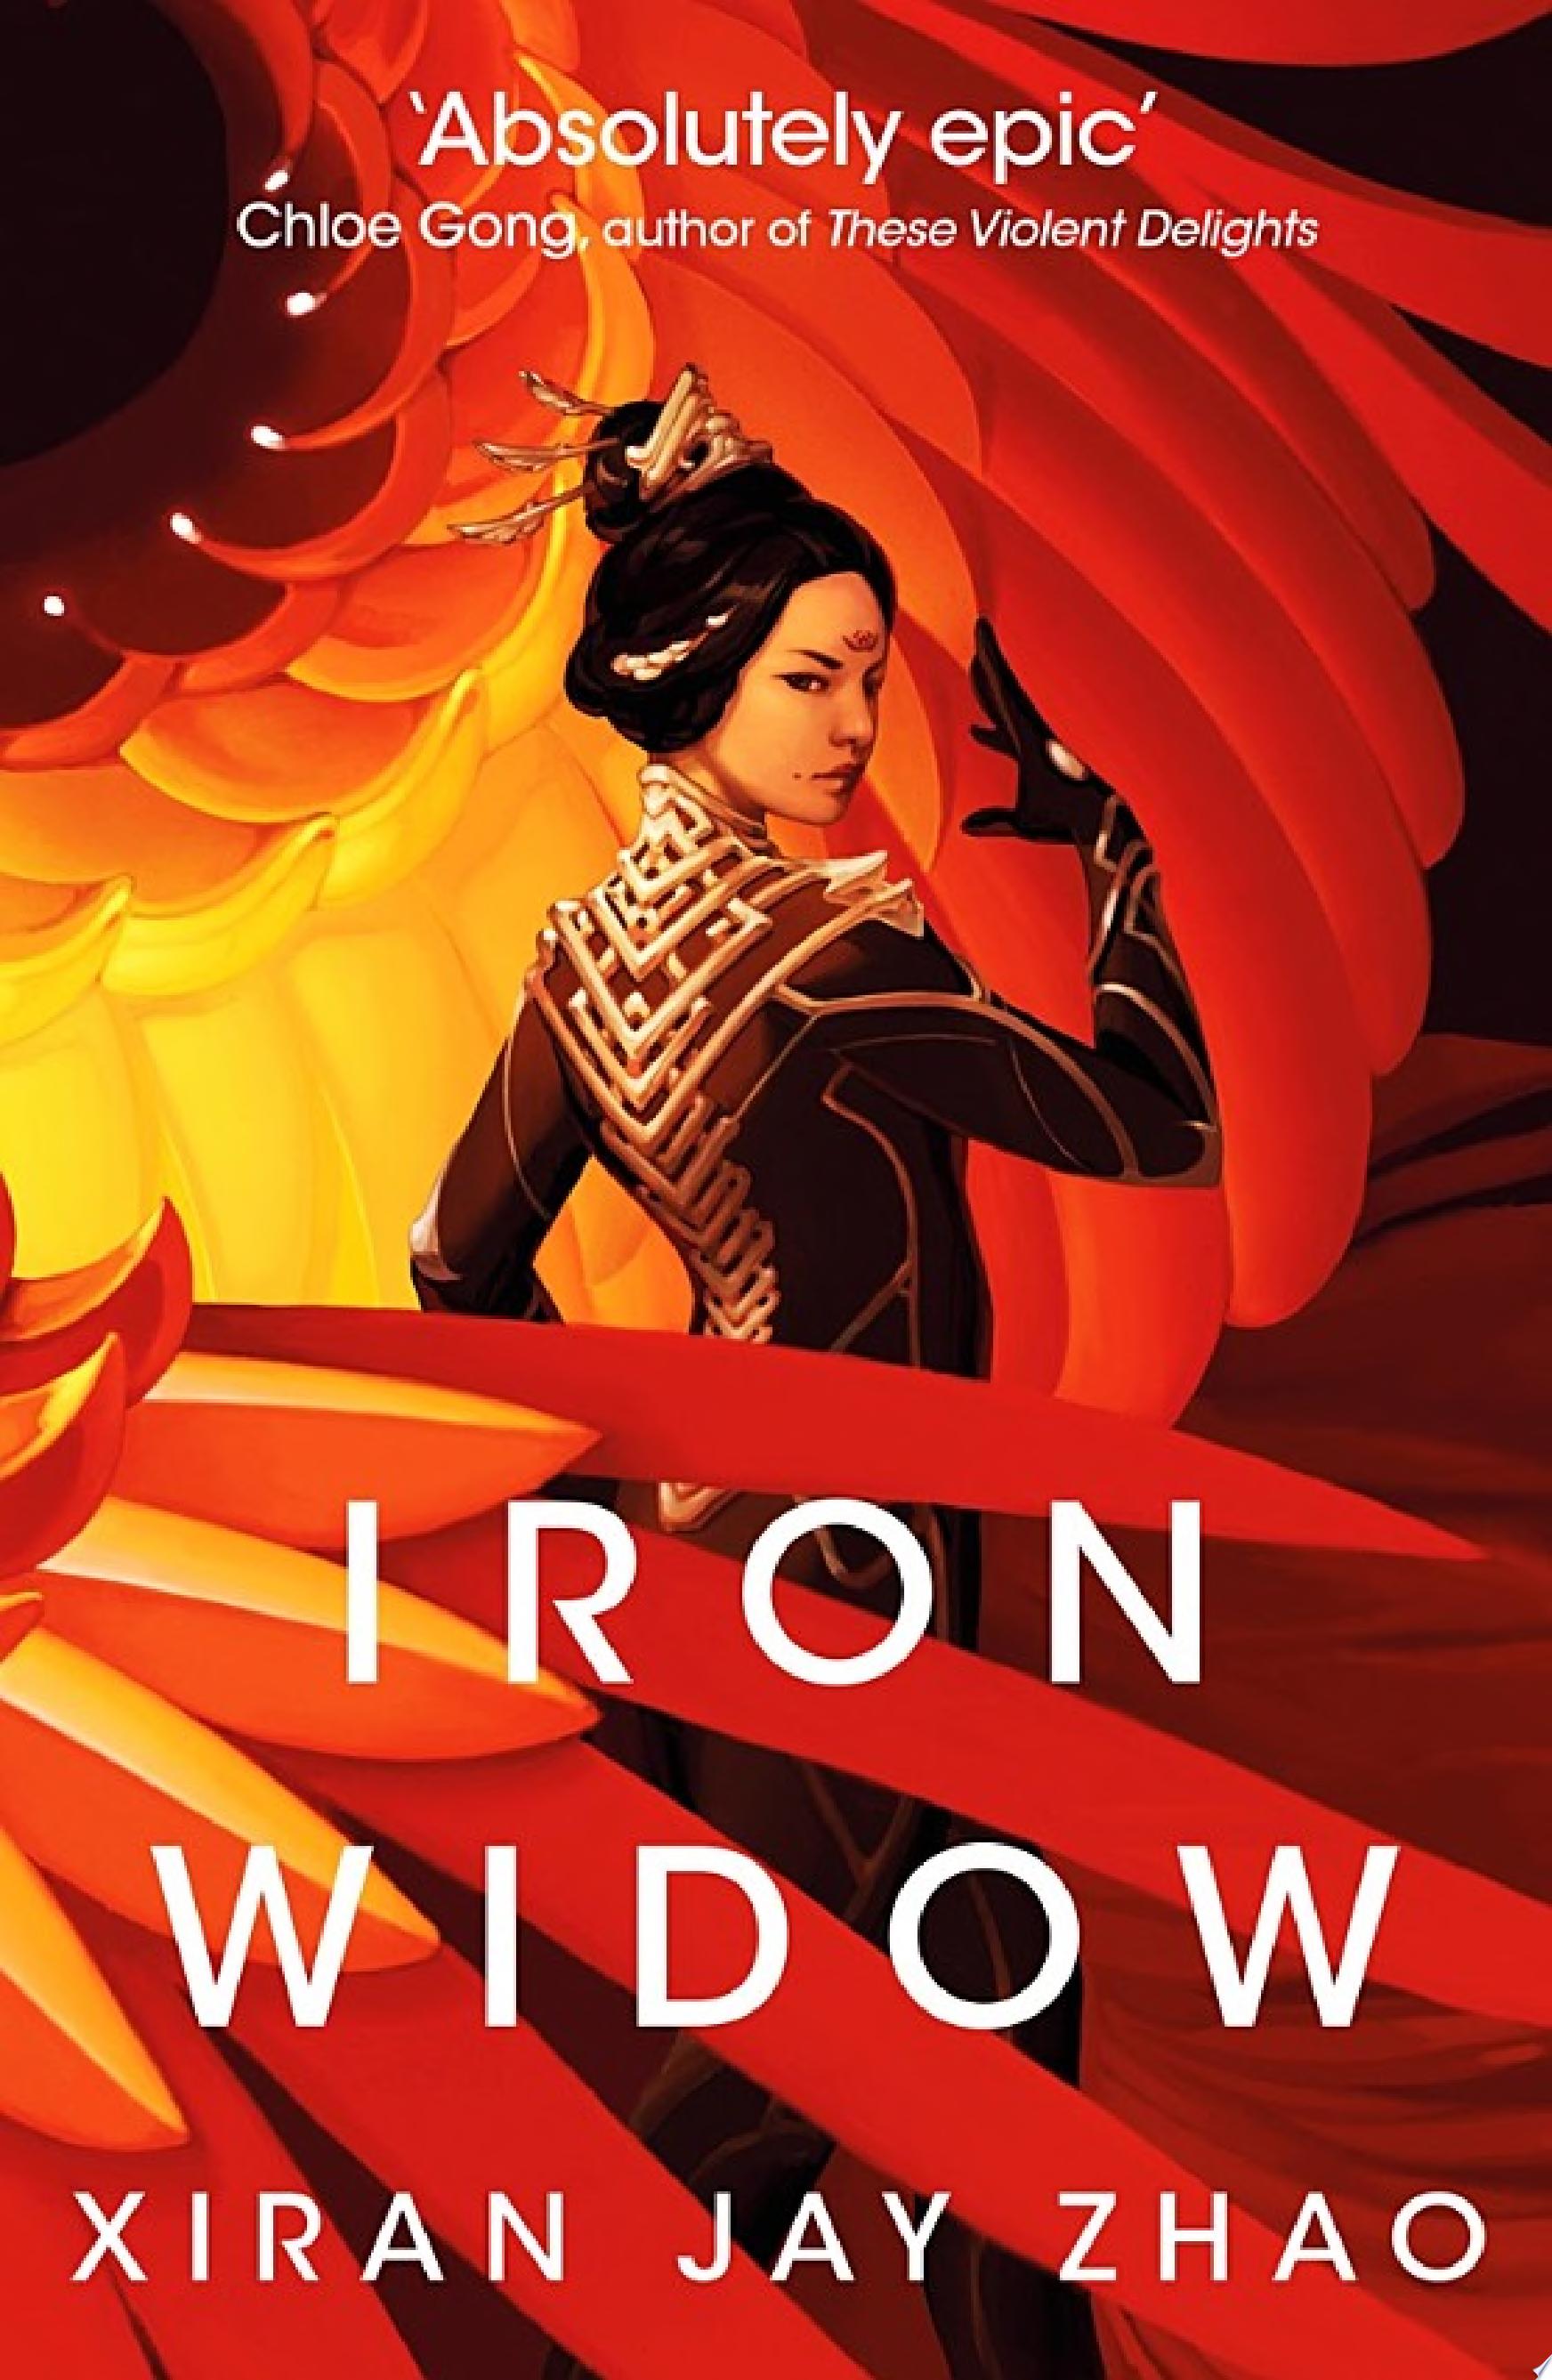 Image for "Iron Widow"